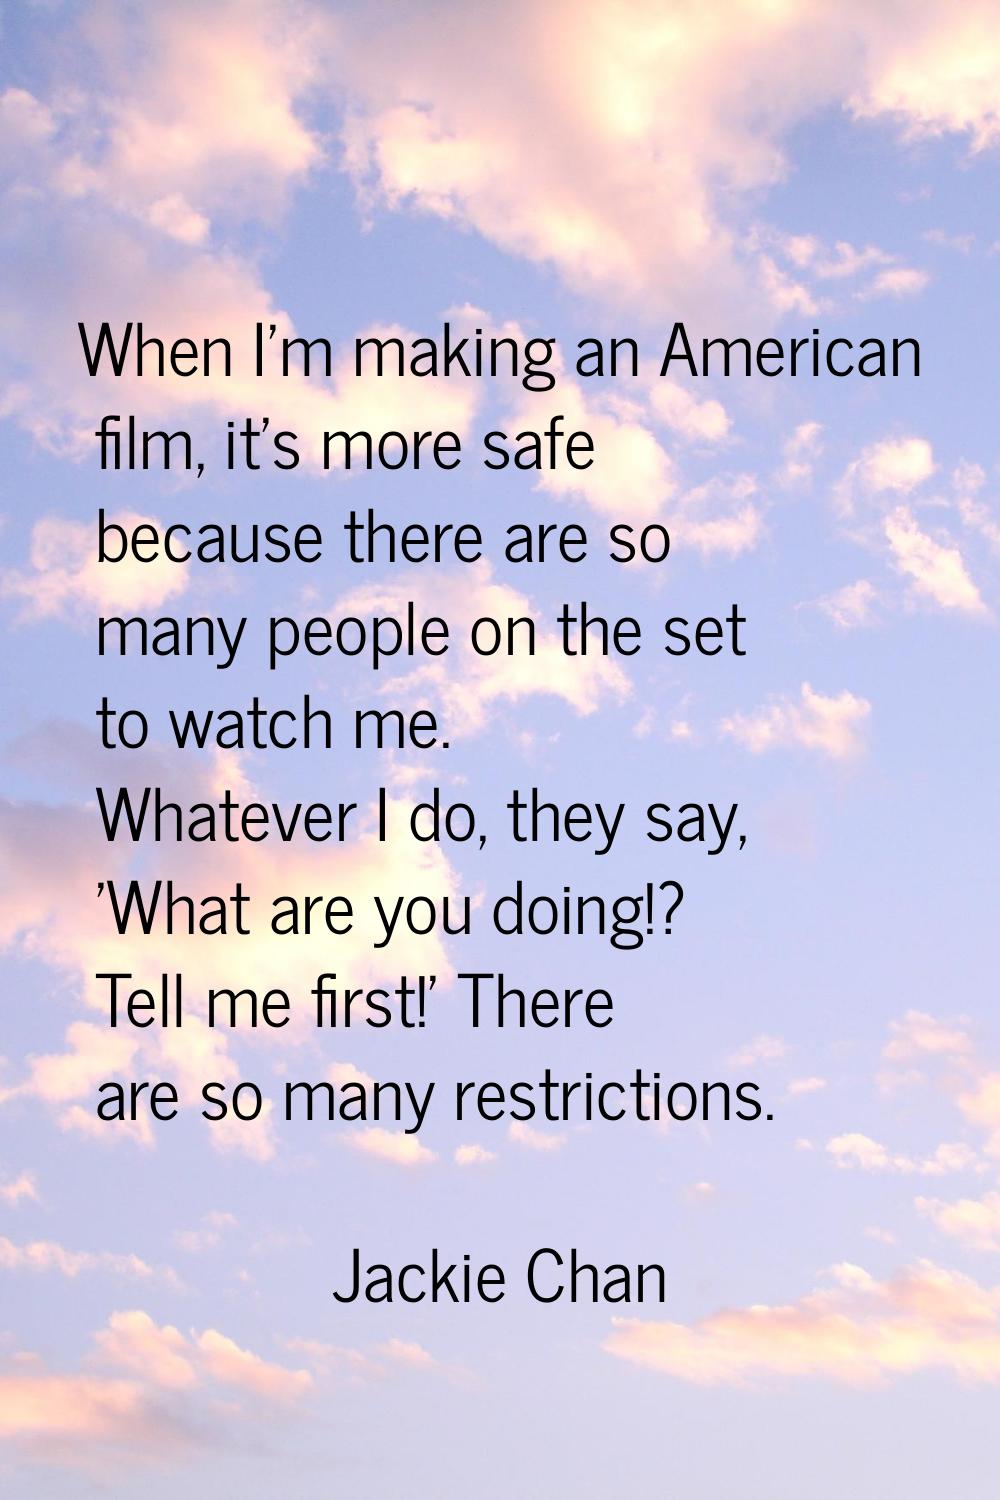 When I'm making an American film, it's more safe because there are so many people on the set to wat